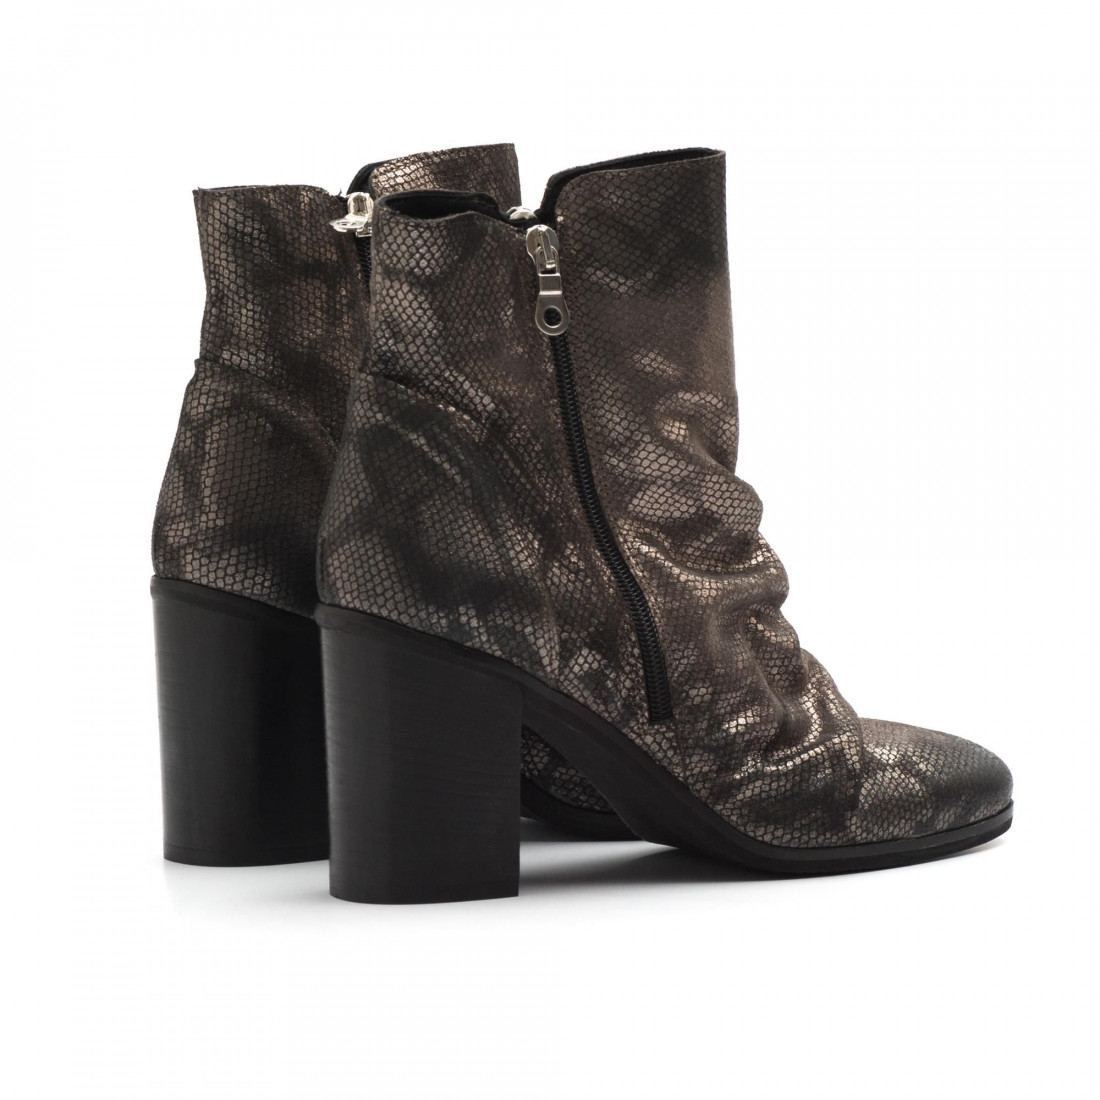 High block heel ankle boots in python printed leather